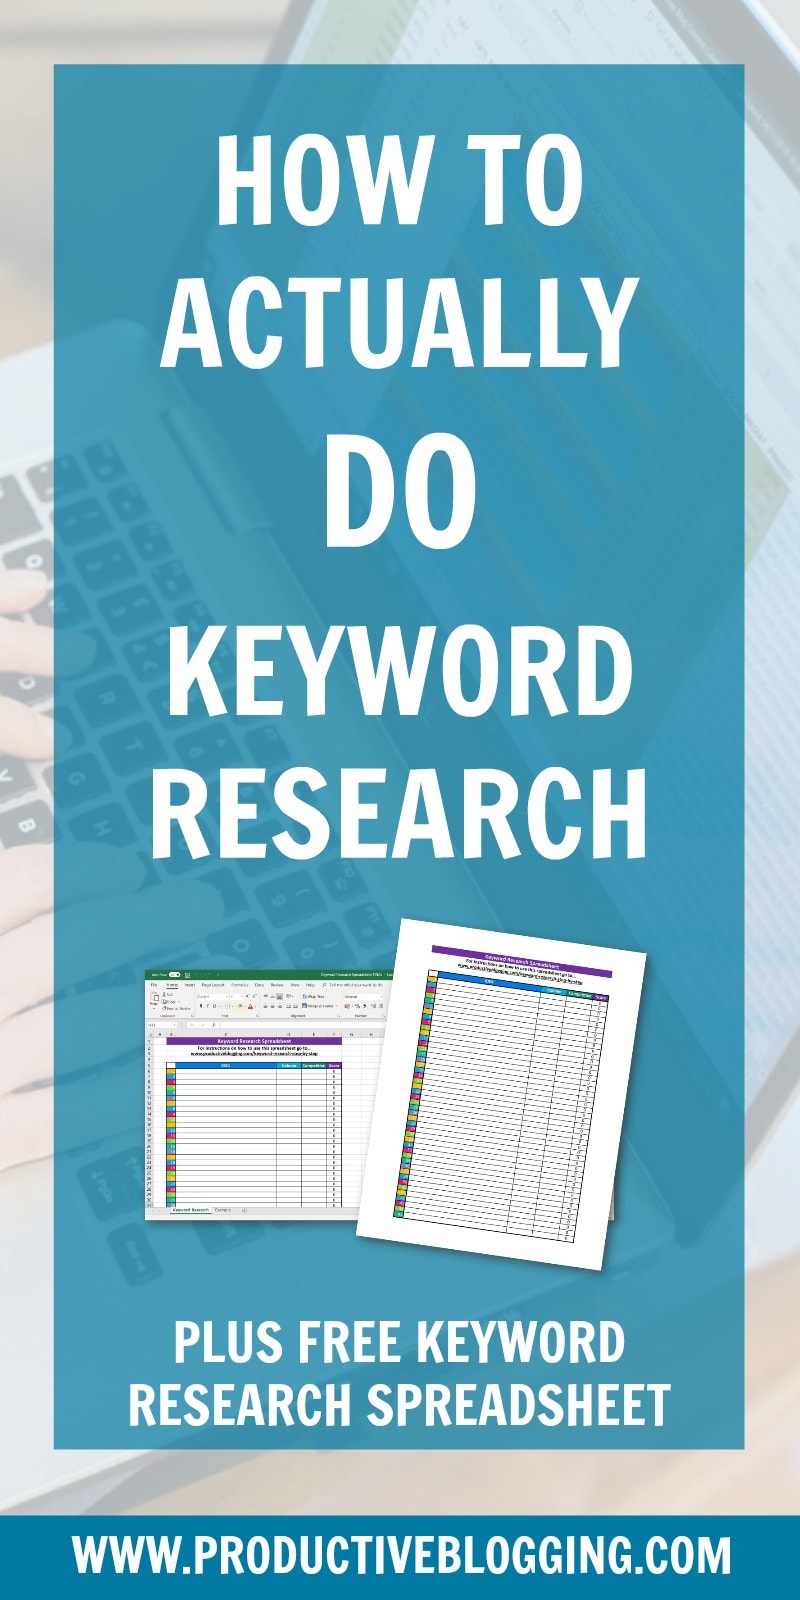 Have you read a lot about keyword research, but still struggle with how to actually DO it? Then this post is for you! I take you step by step through how to do keyword research for your blog, plus provide you with the perfect tool to make keyword research simple – my FREE Keyword Research Spreadsheet! This easy to use spreadsheet calculates which of your post ideas are likely to perform best on your blog. #SEO #SEOtips #searchengineoptimization #keywordresearch #yoast #productiveblogging